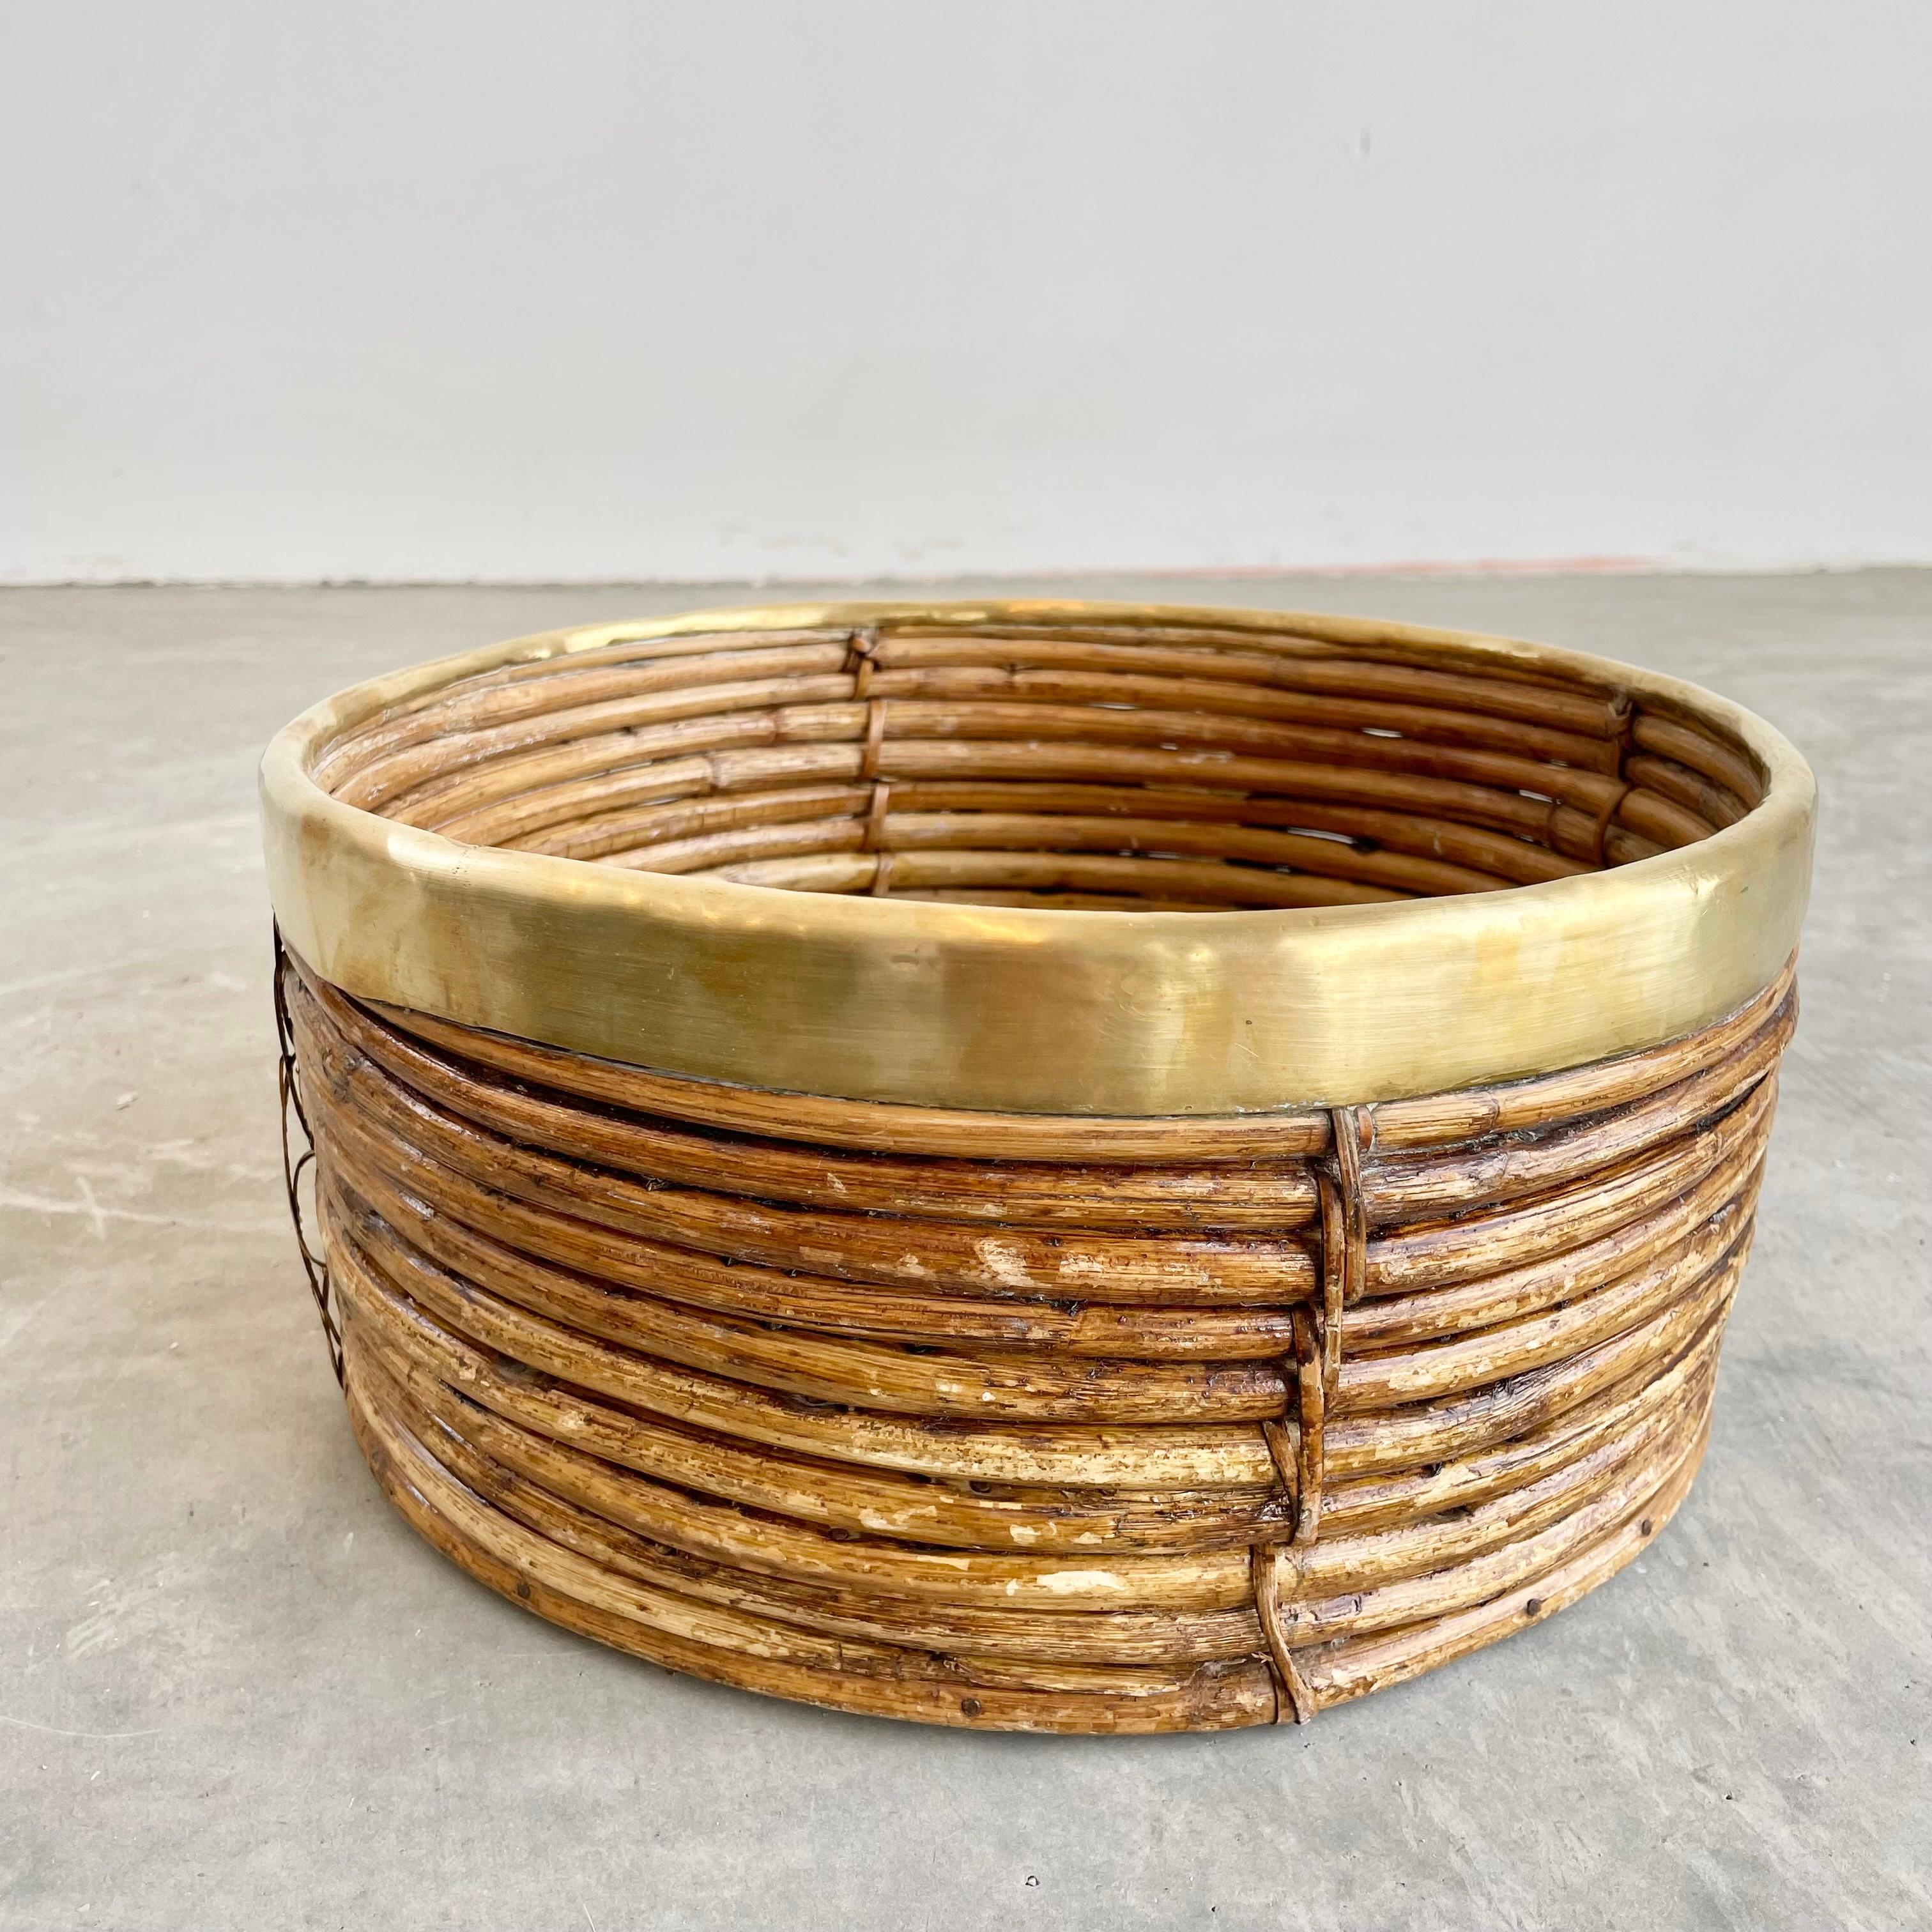 Mid-20th Century Rattan and Brass Bowl in the Style of Gabriella Crespi, 1960s Italy For Sale